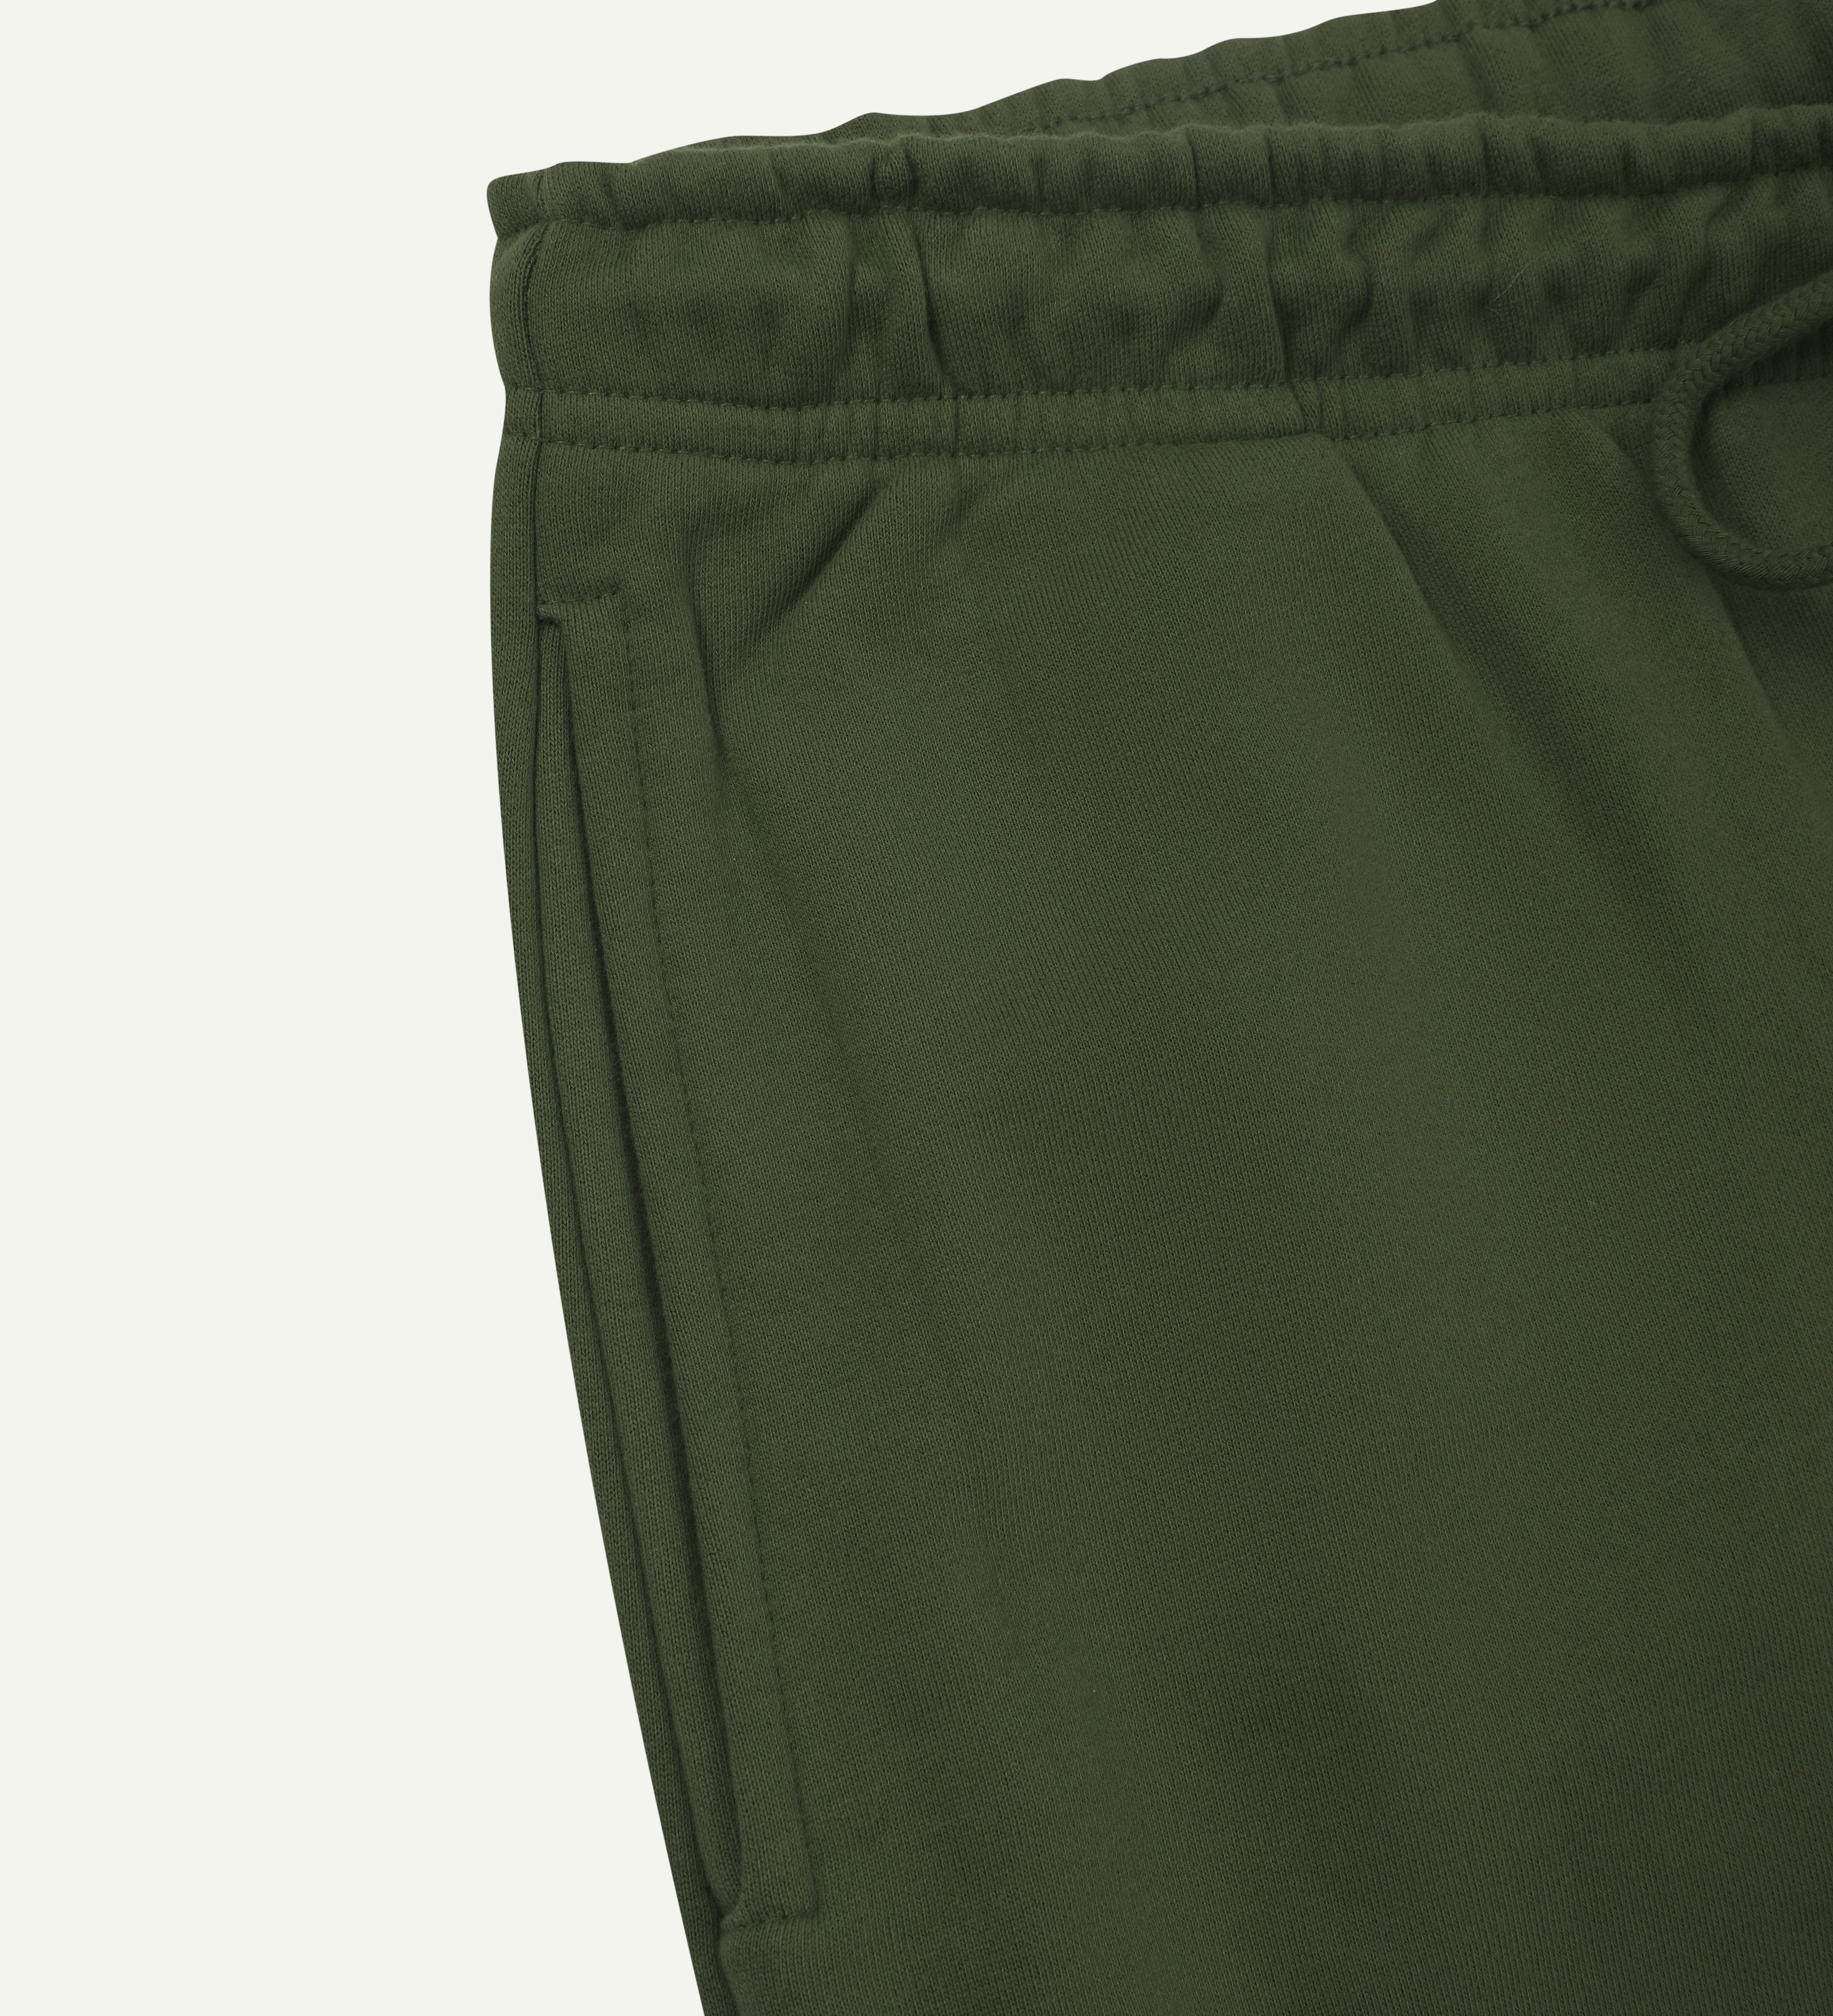 Close up view of organic cotton Joggers for men by Uskees showing the side pocket and drawstring waist.